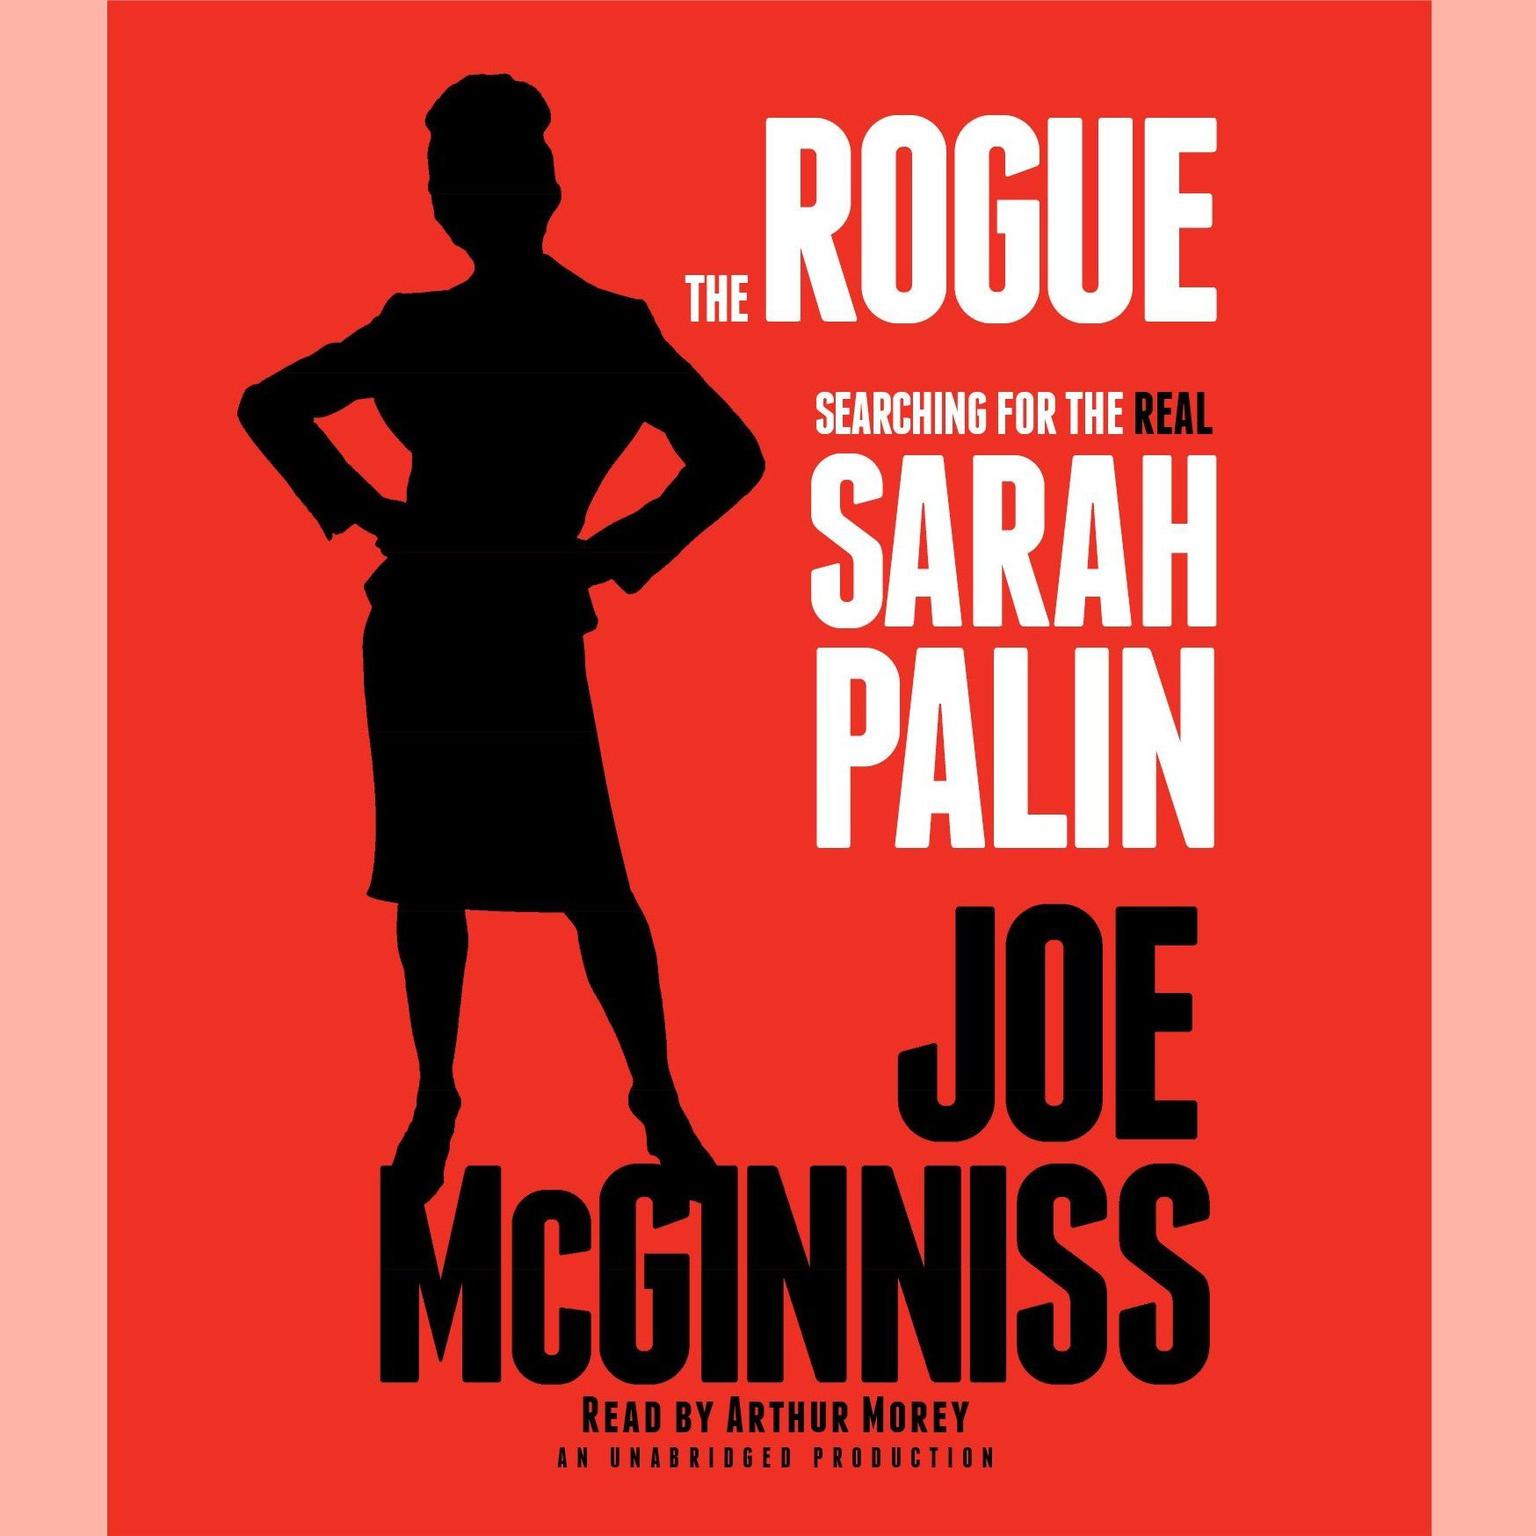 The Rogue: Searching for the Real Sarah Palin Audiobook, by Joe McGinniss